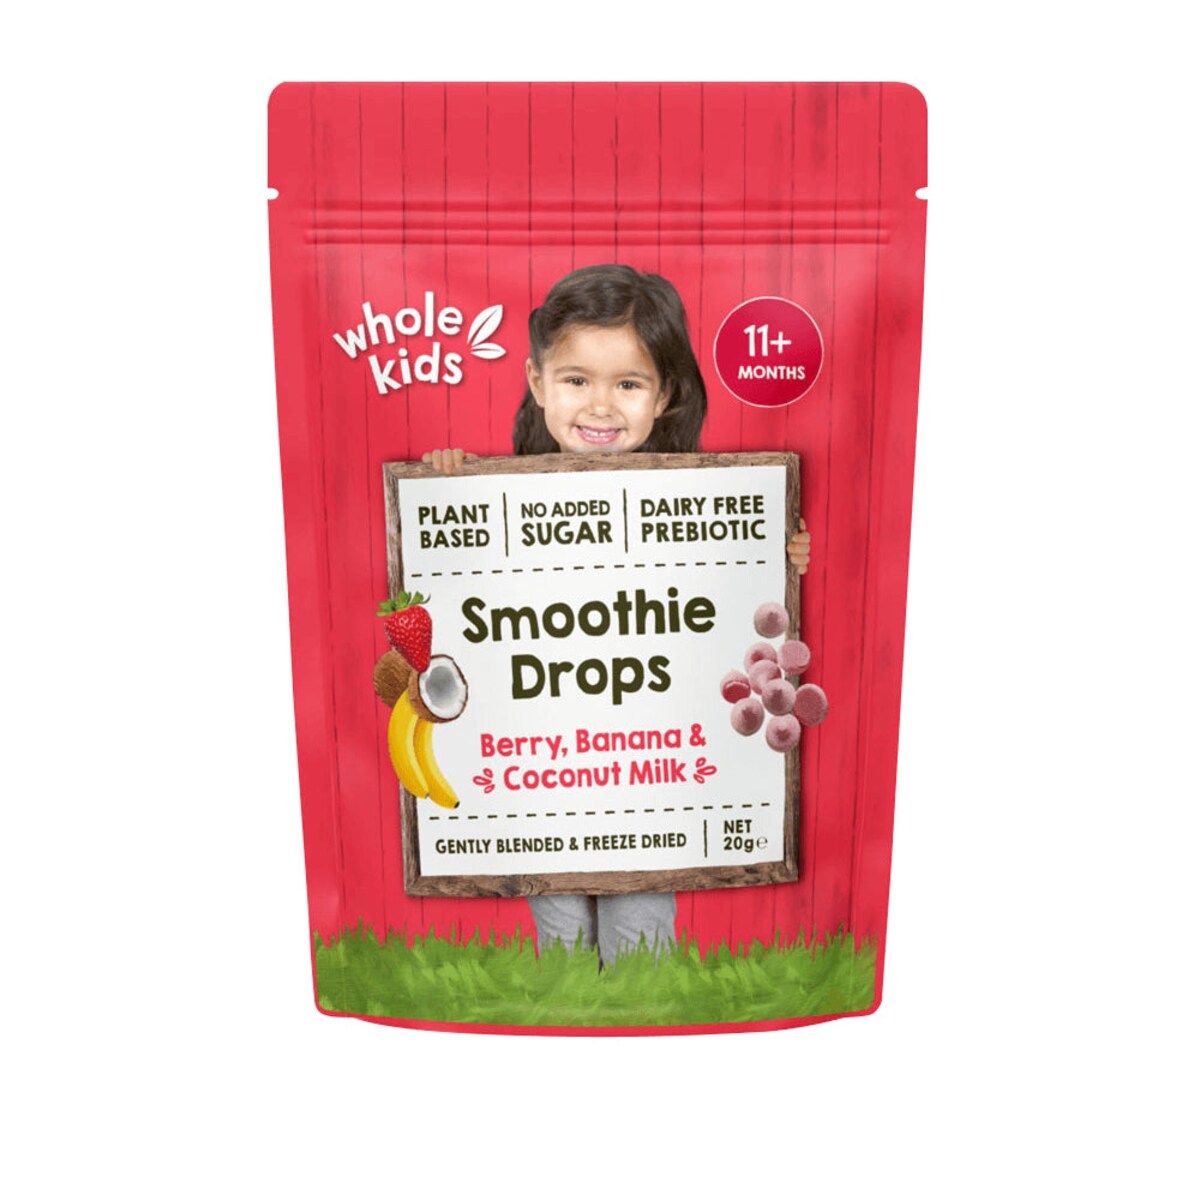 Whole Kids Smoothie Drops Berry Banana & Coconut Milk 20g